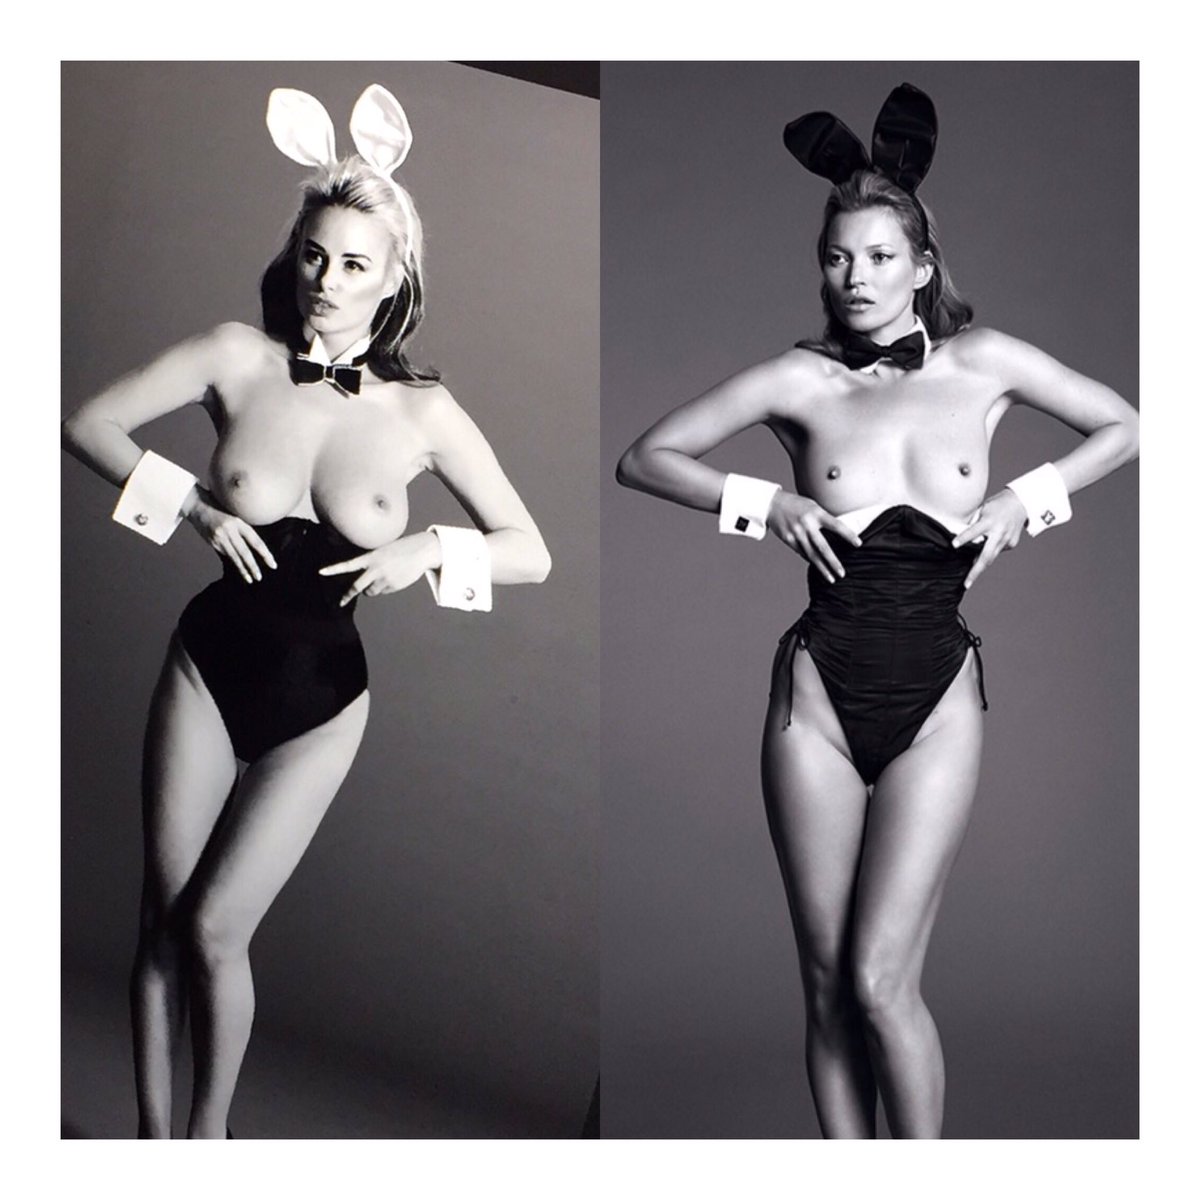 Channeling my inner Kate Moss ????

#Playboy

(Pic bts from Sun shoot) https://t.co/aqN453F2VY